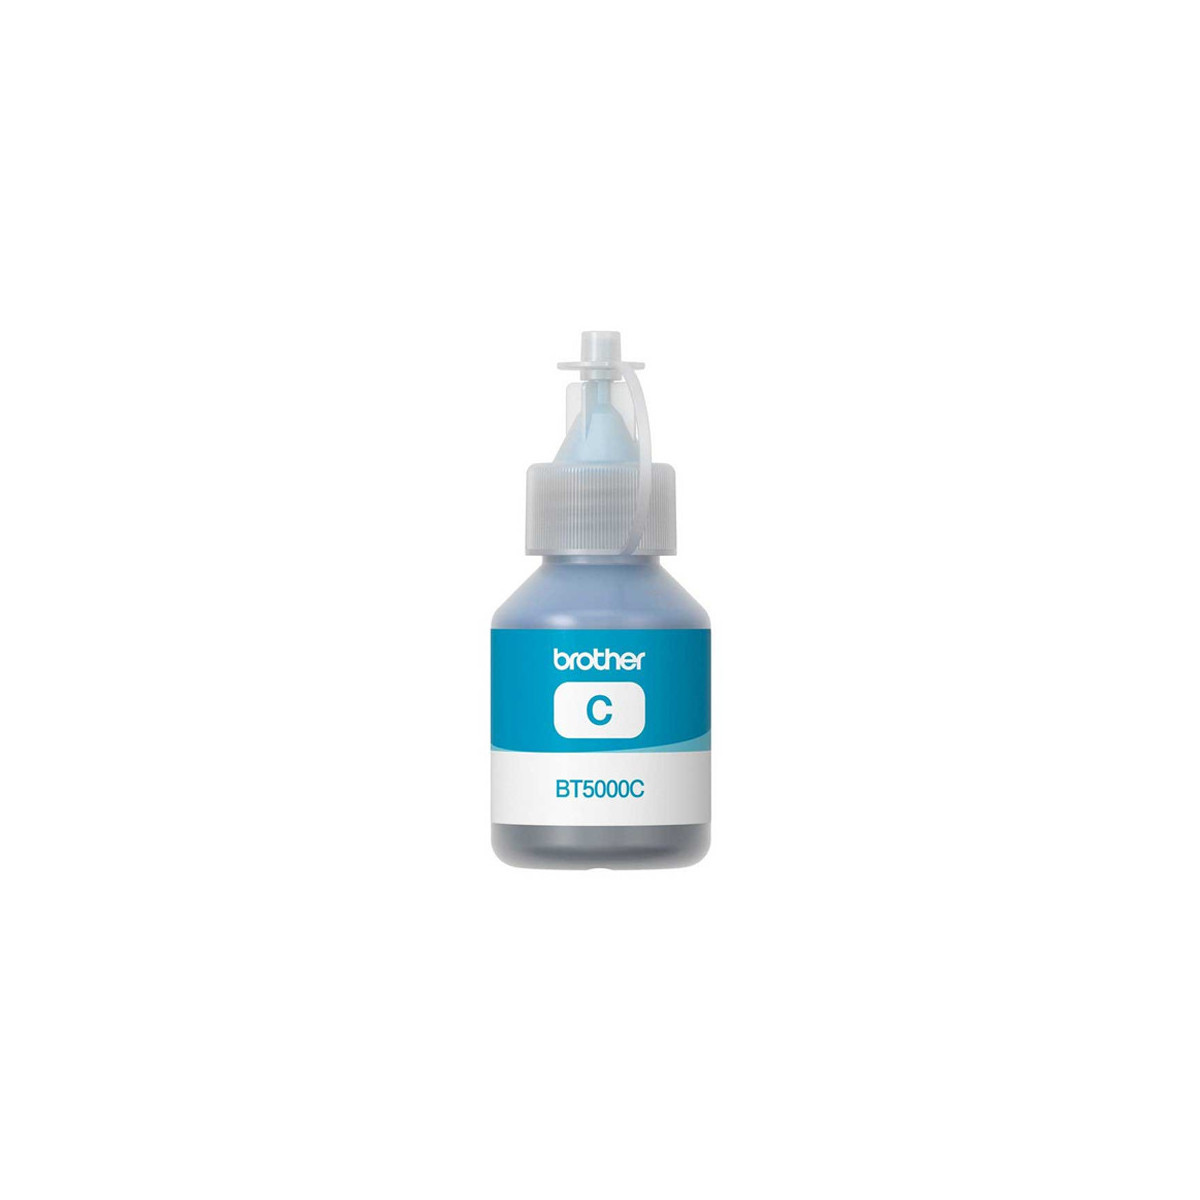 BOUTEILLE D'ENCRE ADAPTABLE BROTHER BT5000C - 100ML - CYAN